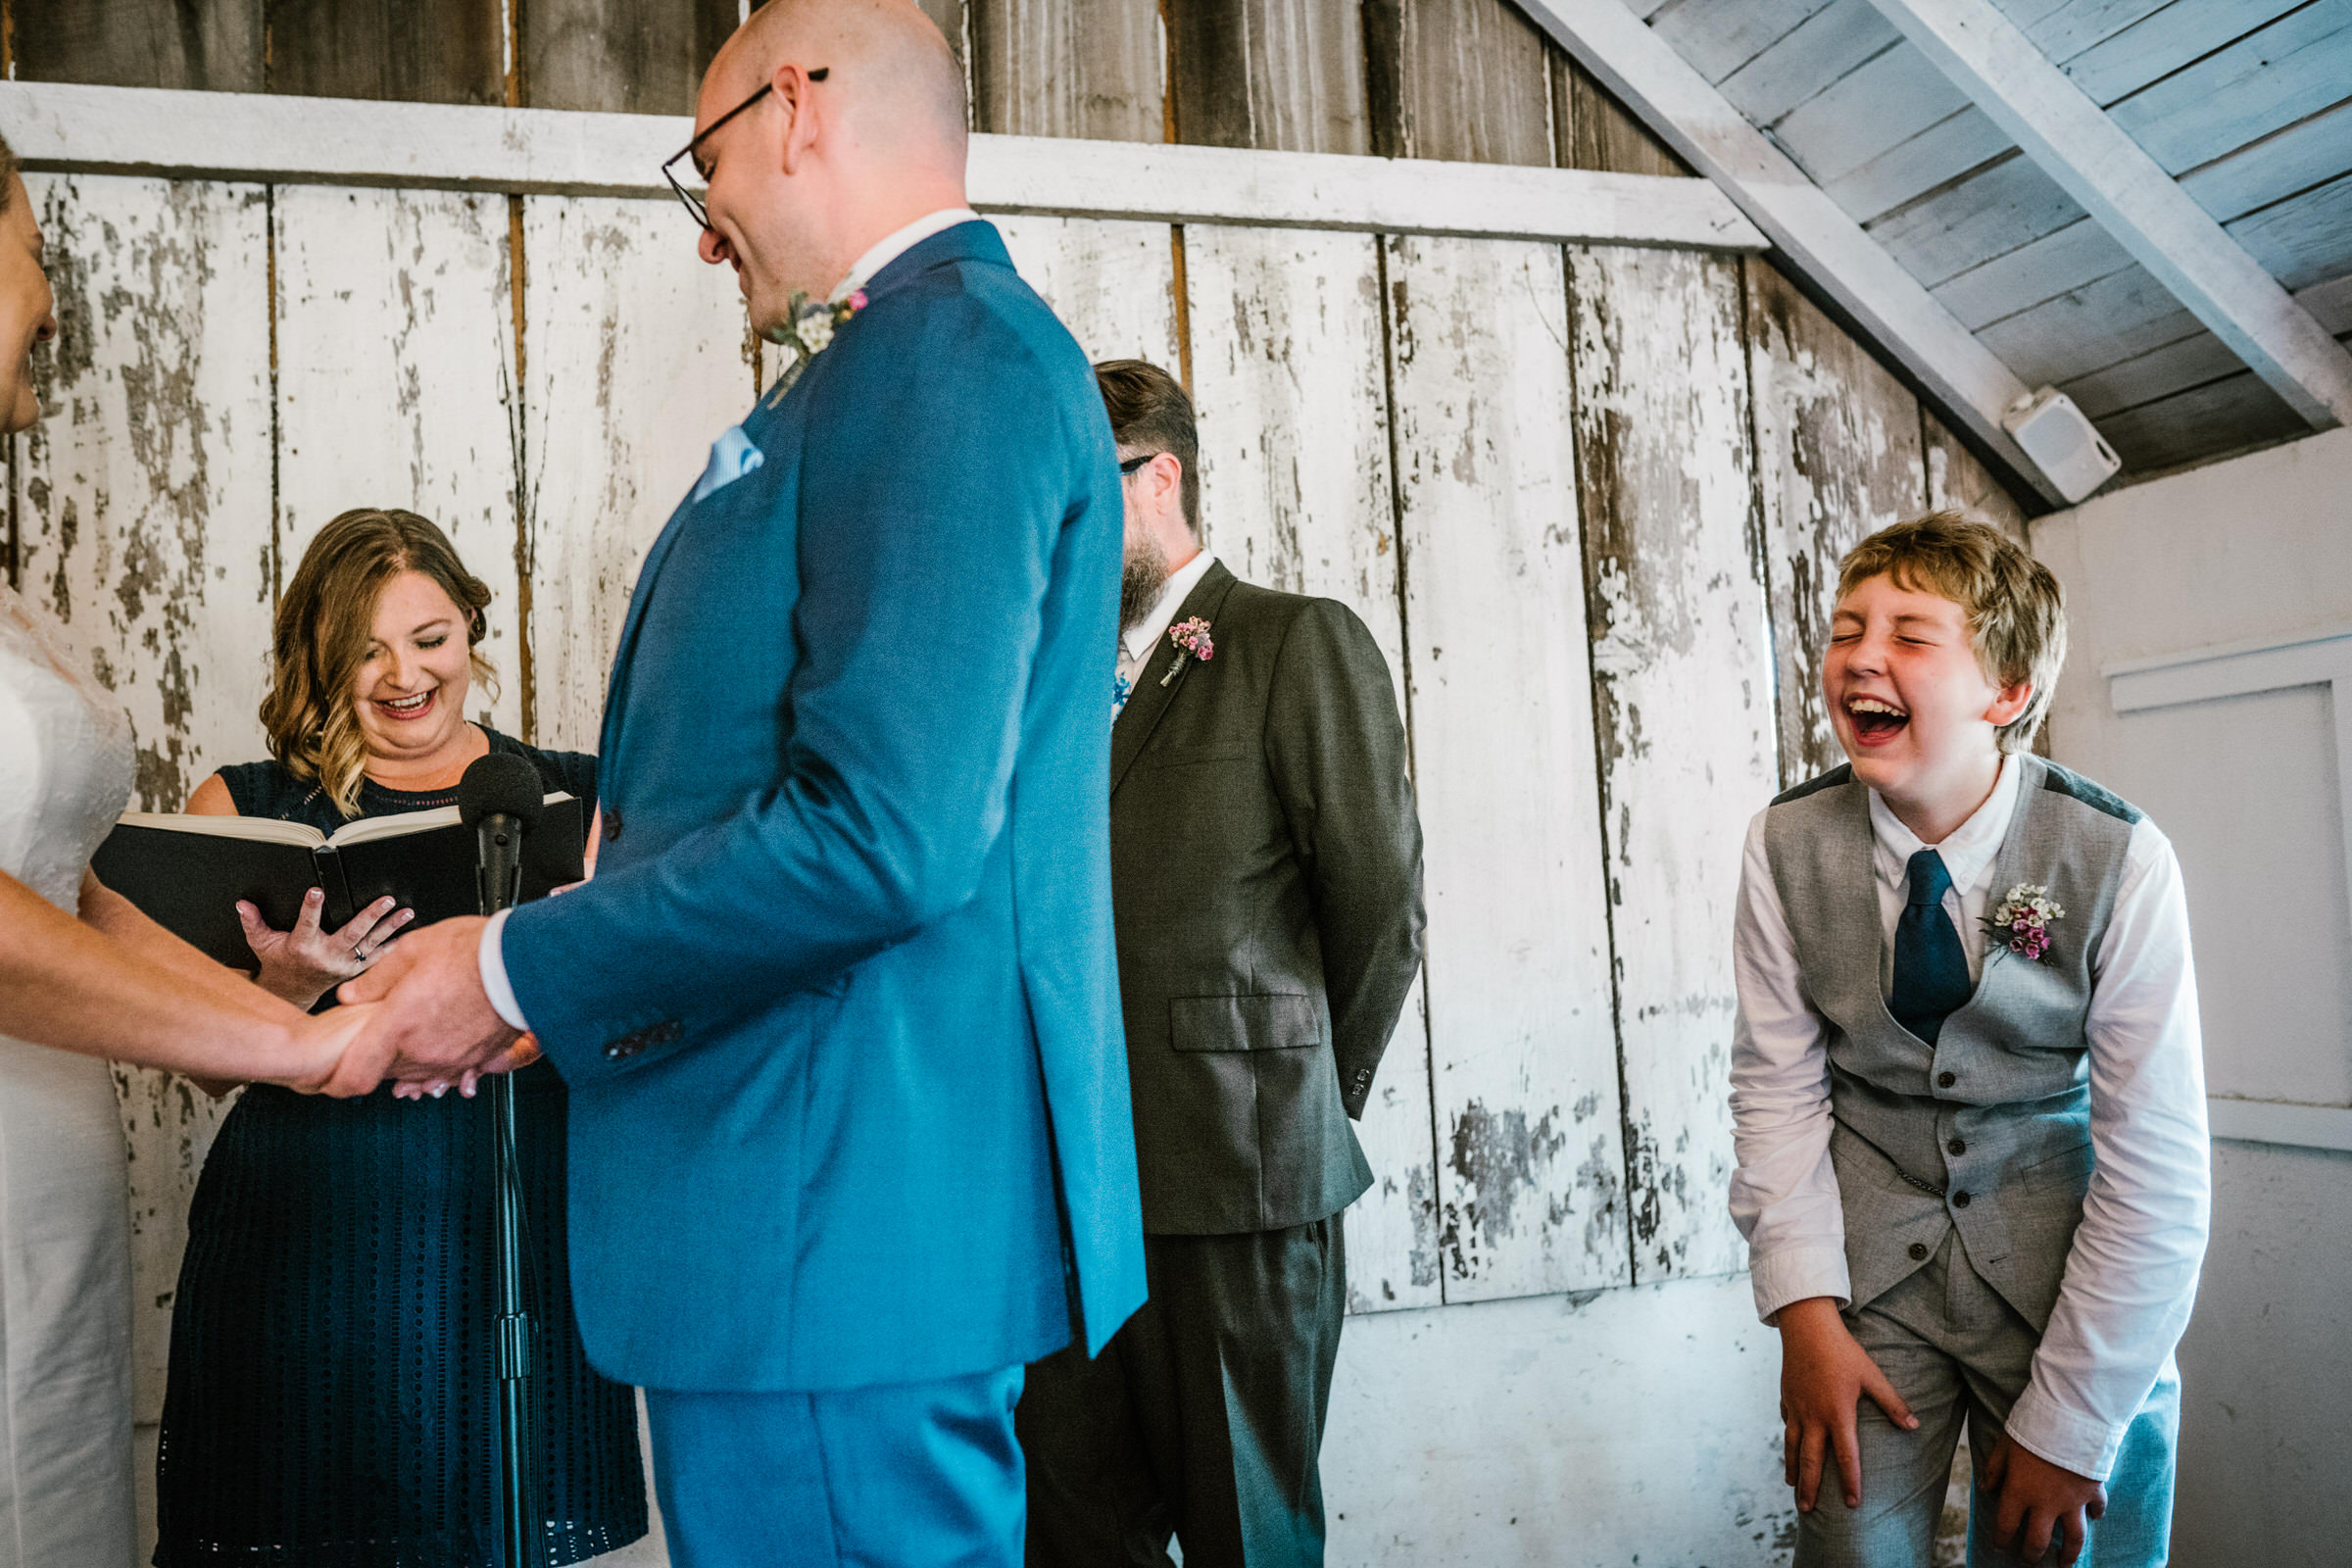 Wayfarer Whidbey Island Wedding: Joe's son giggles at a poem written by Taylor Mali, called "How Falling in Love is like Owning a Dog"